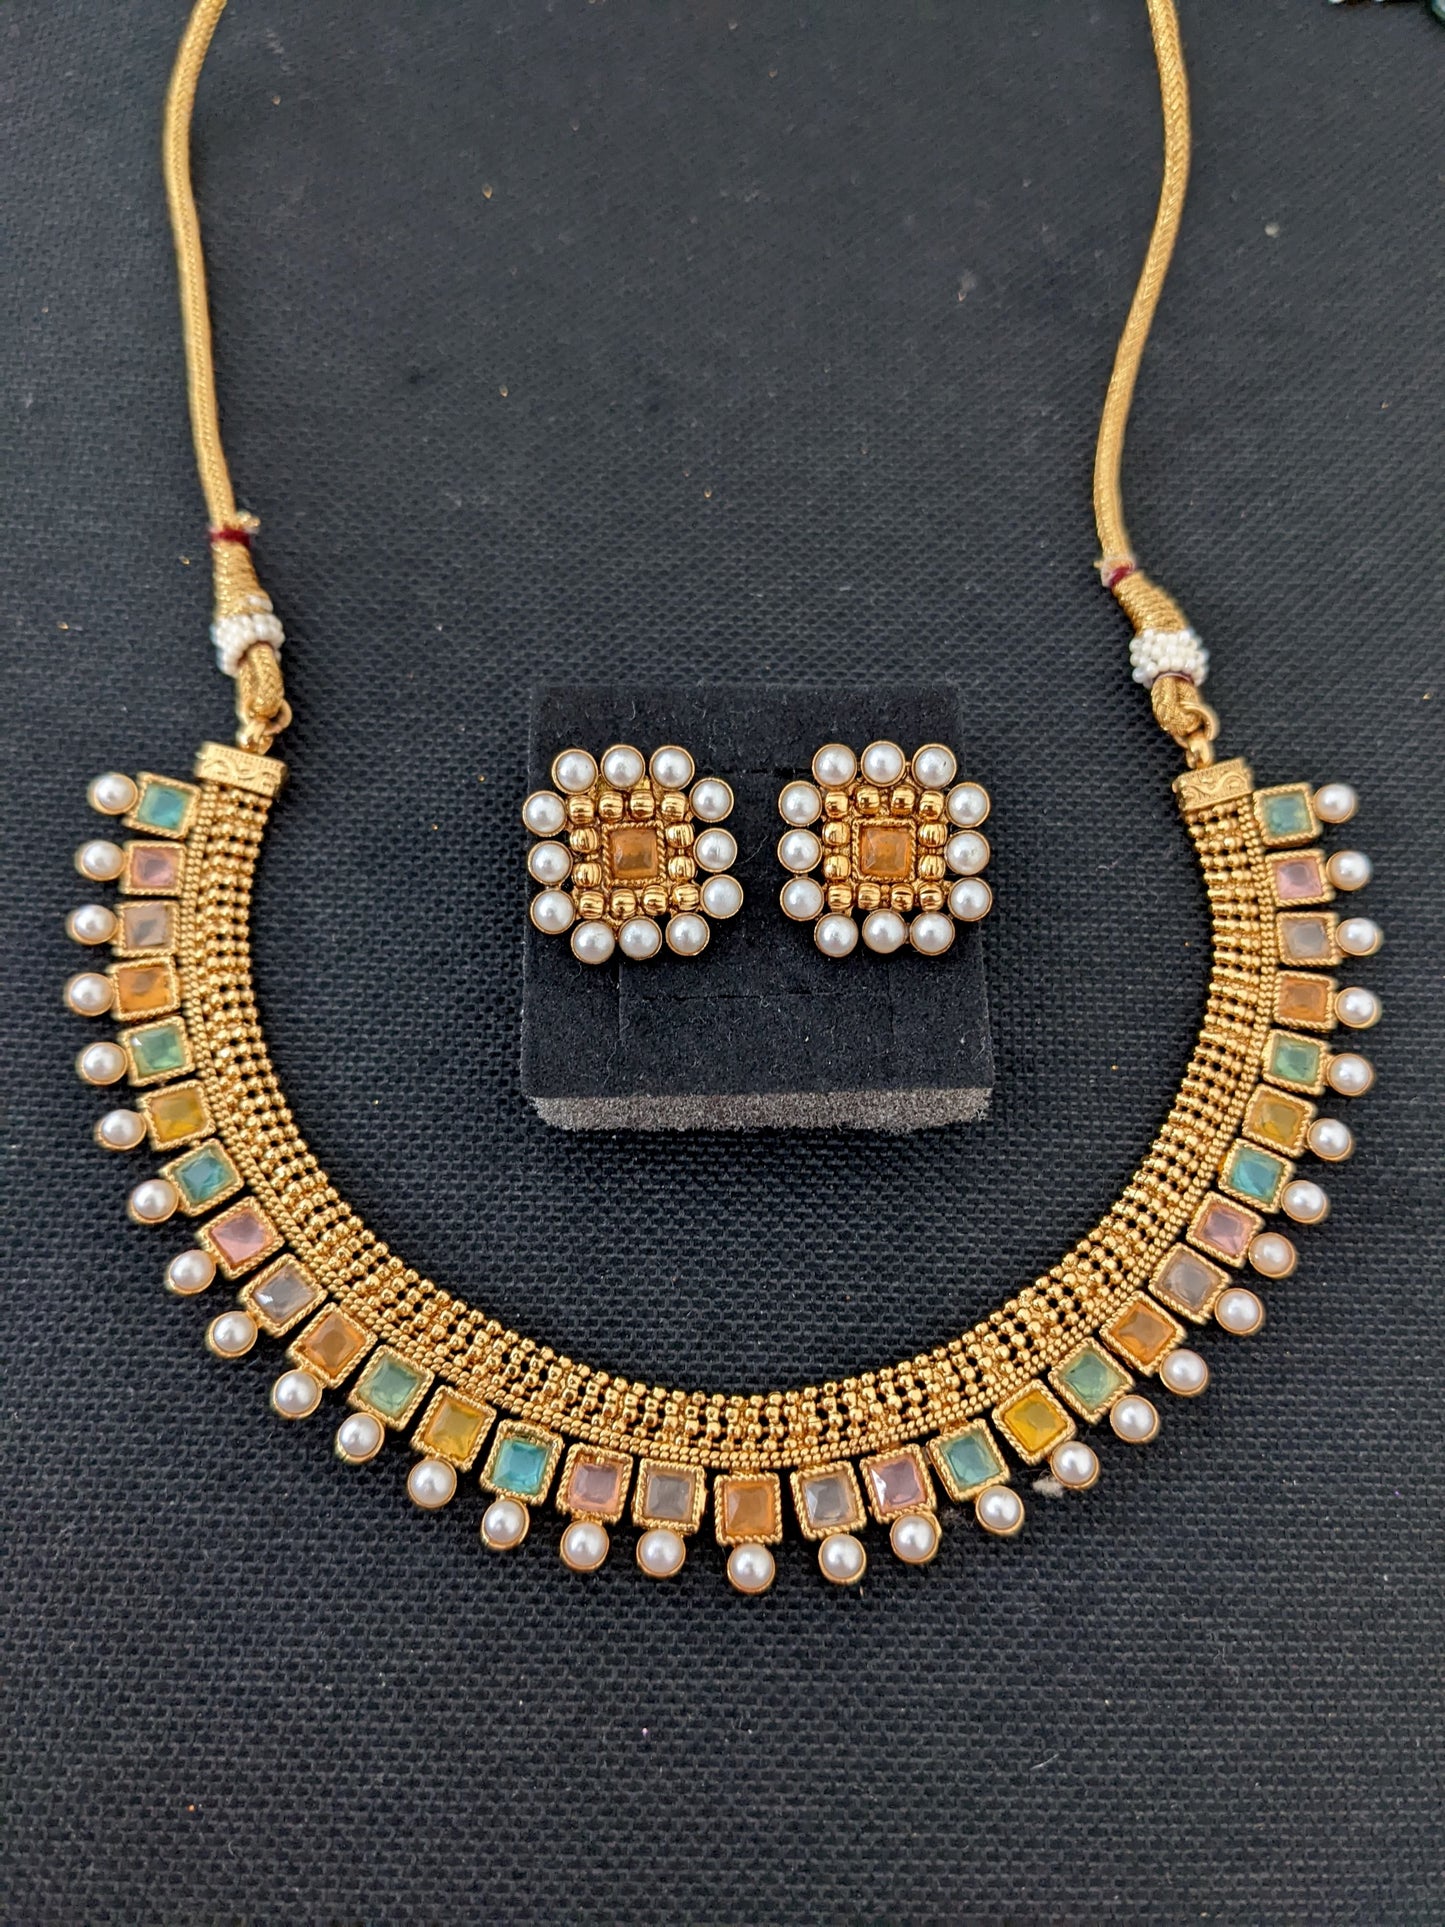 Square design Polki Choker Necklace and Earrings set